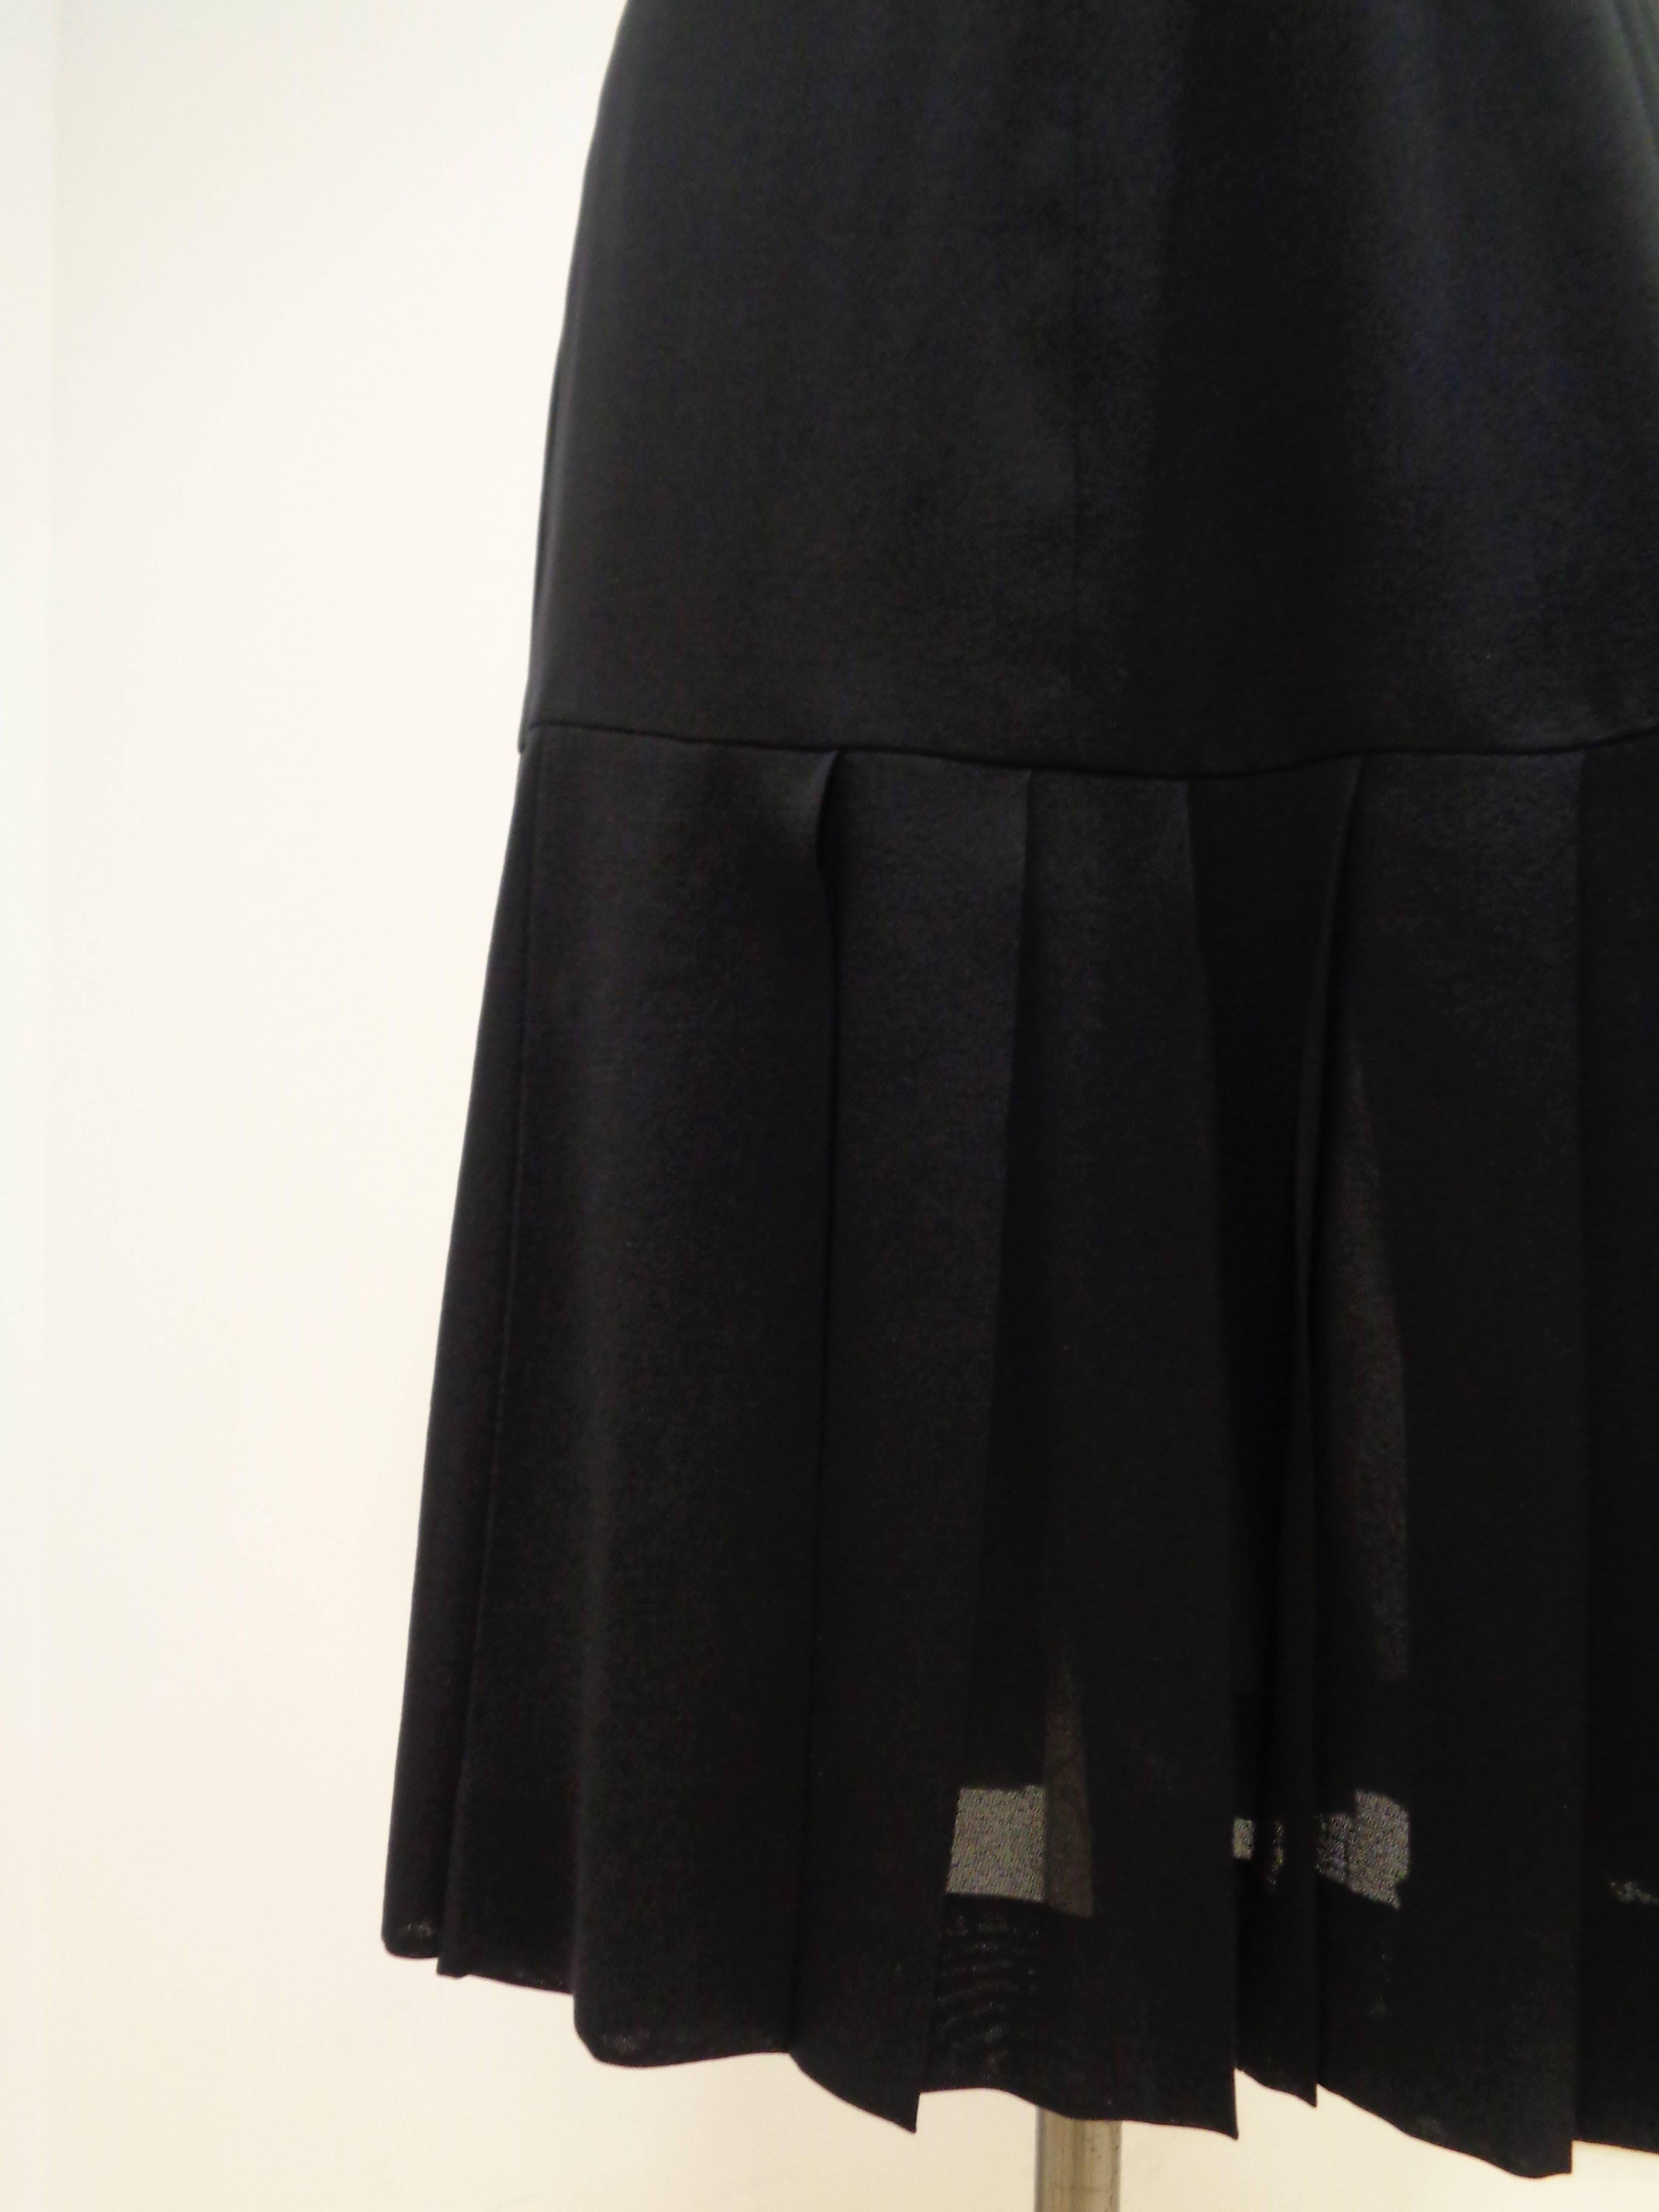 Chanel Boutique Black Skirt

Chanel boutique black see through on the down Skirt

totally made in france
in size S/M